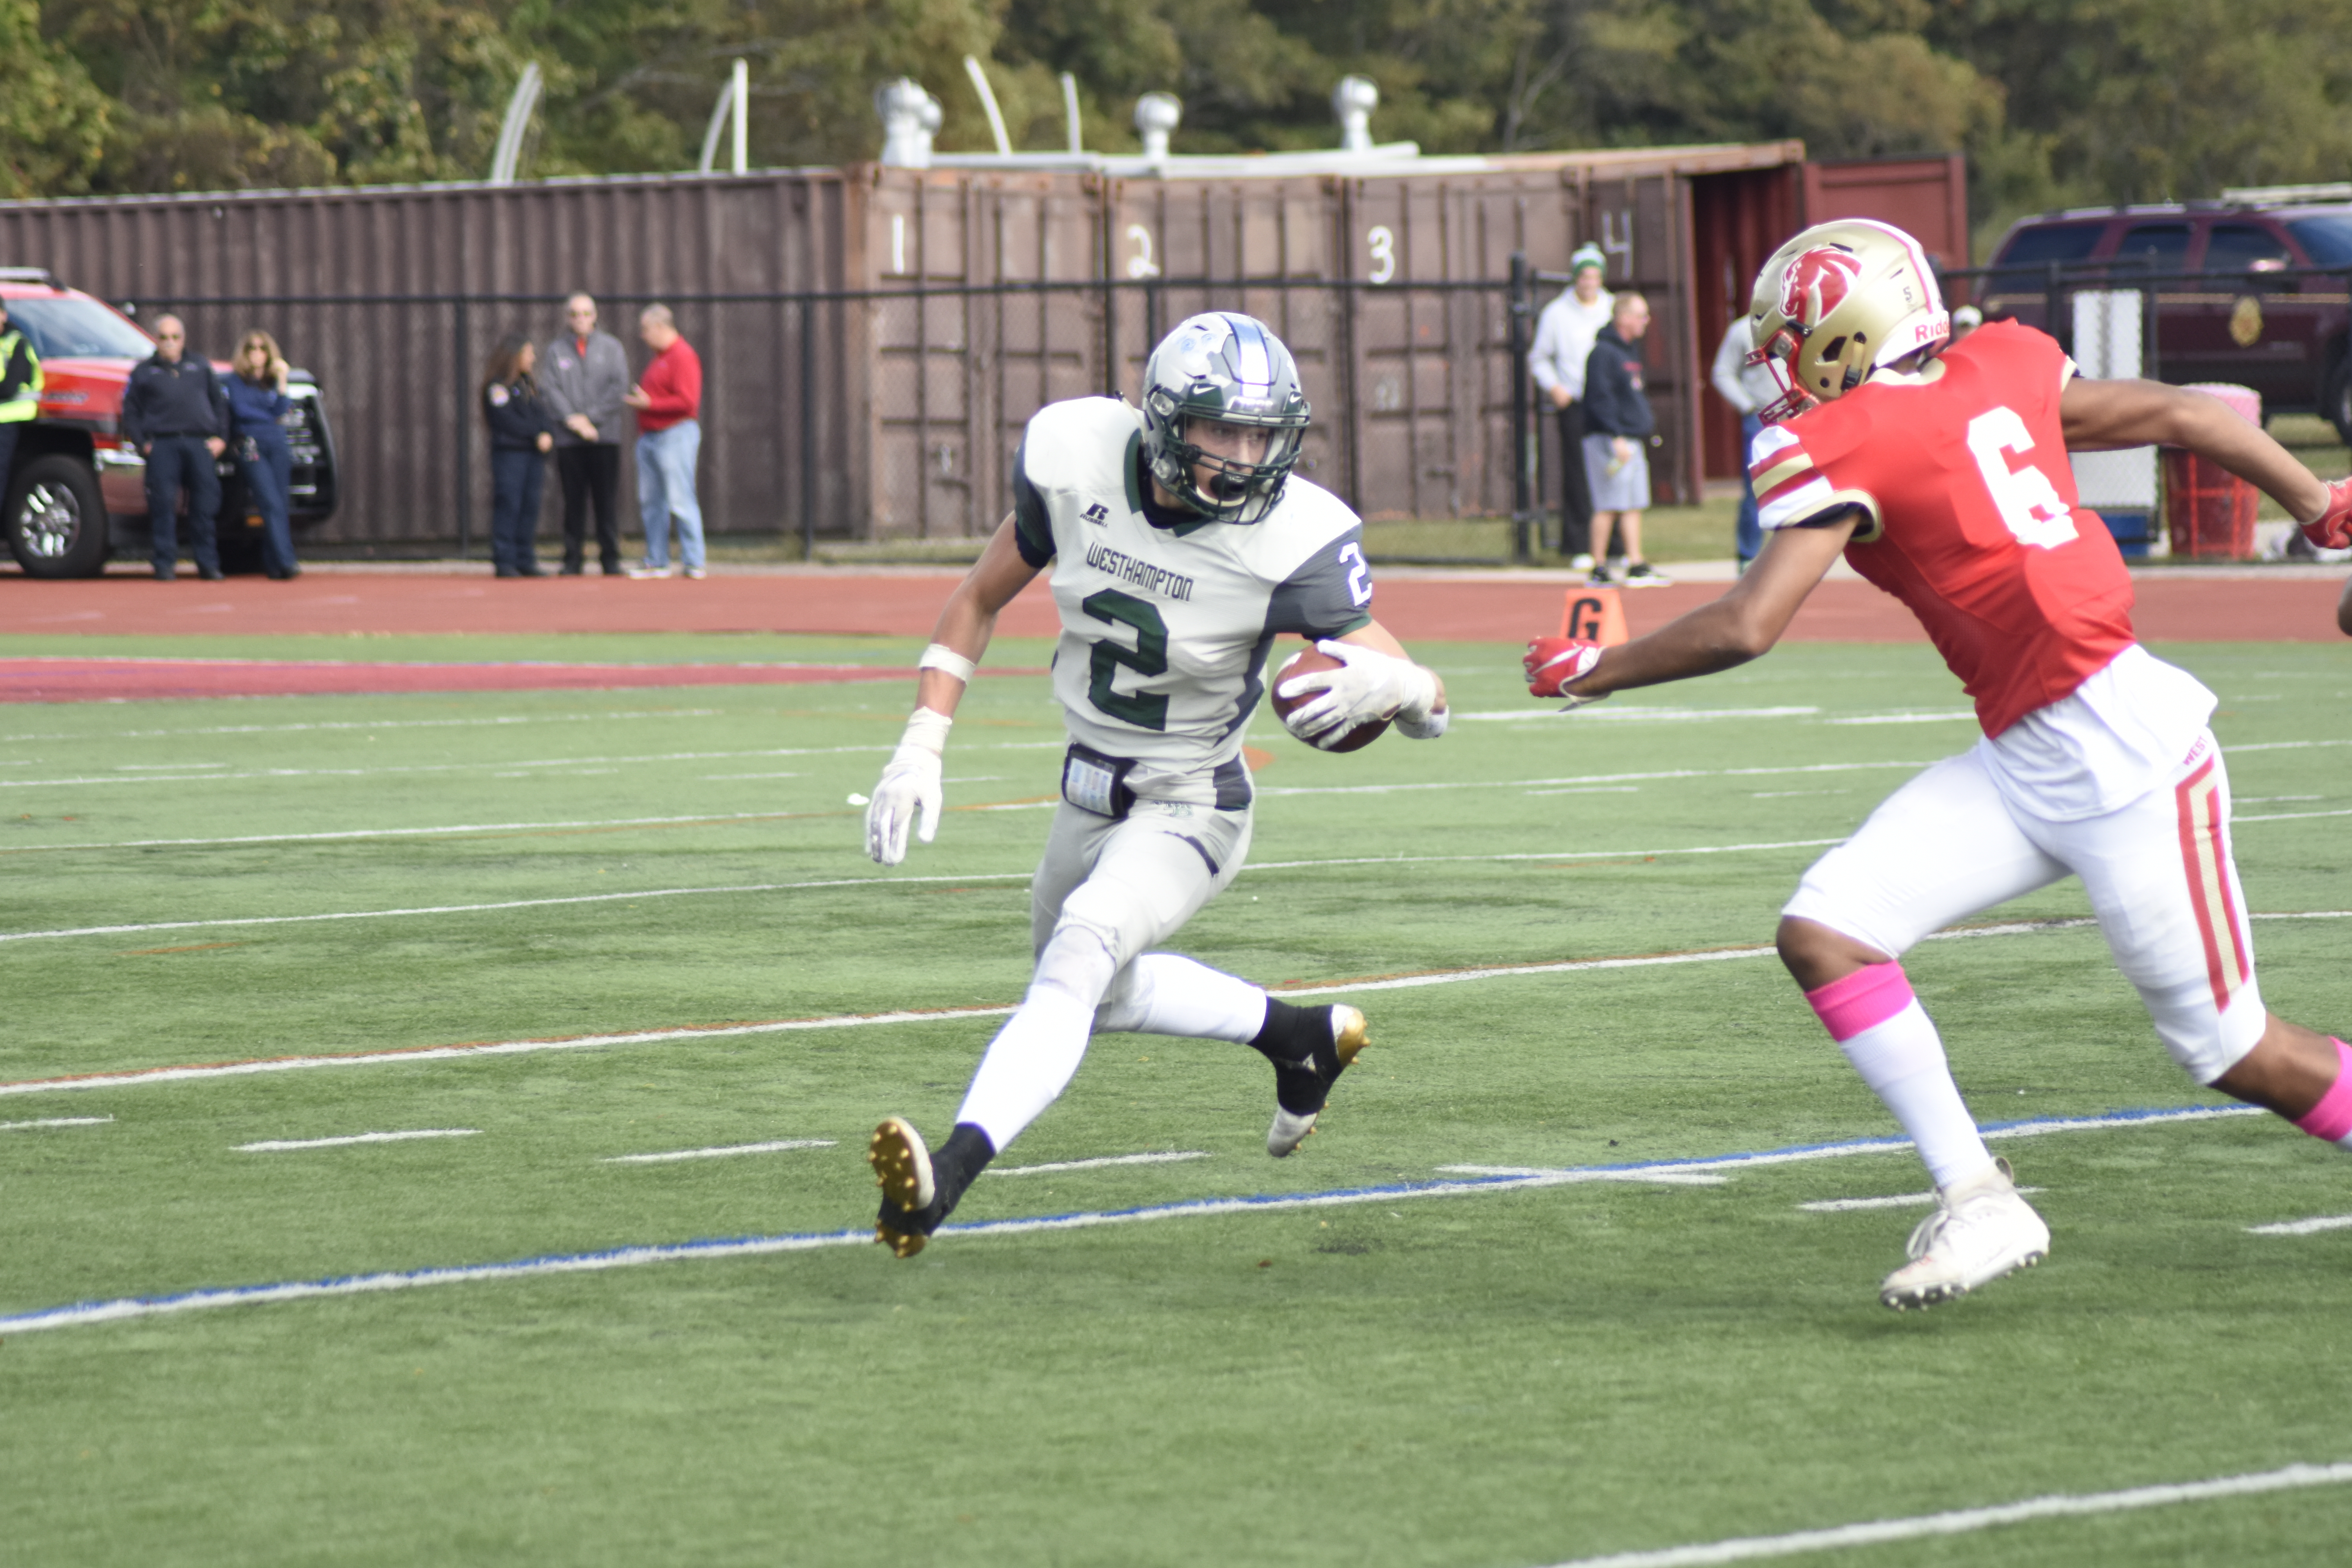 Westhampton Beach senior Jaden AlfanoStJohn rushed for 177 yards on 25 carries and scored all of the 'Canes three touchdowns on Saturday afternoon.